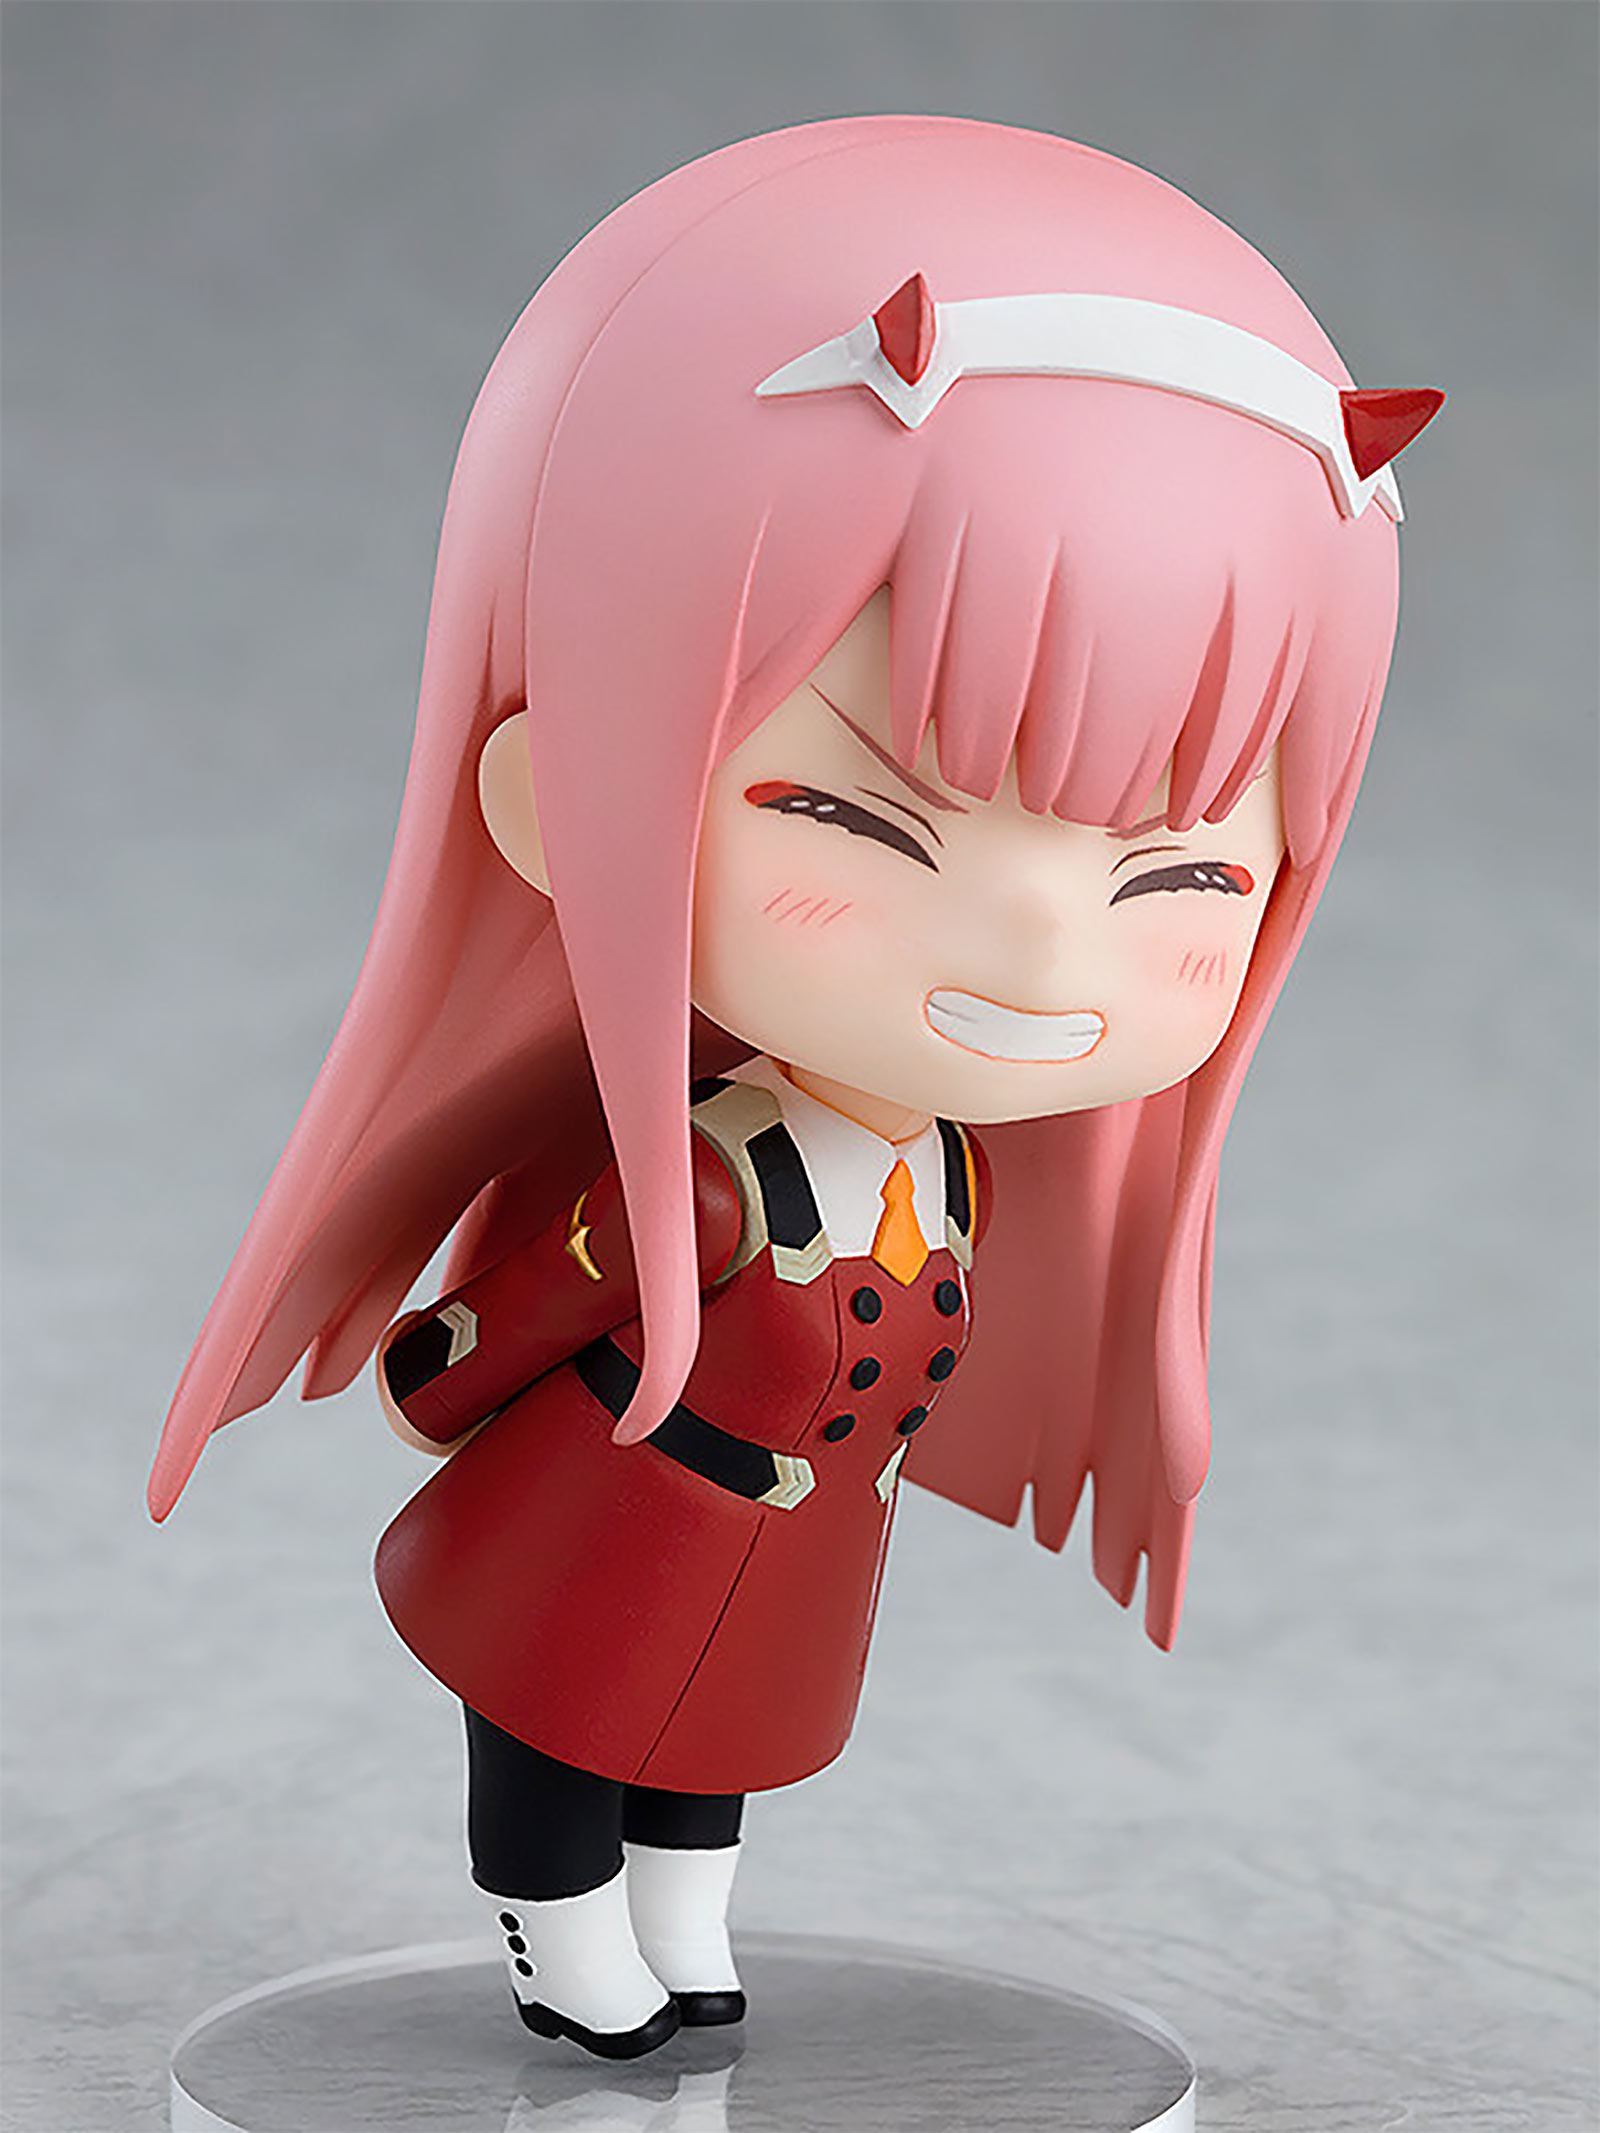 DARLING in the FRANXX - Zero Two Nendoroid Action Figure